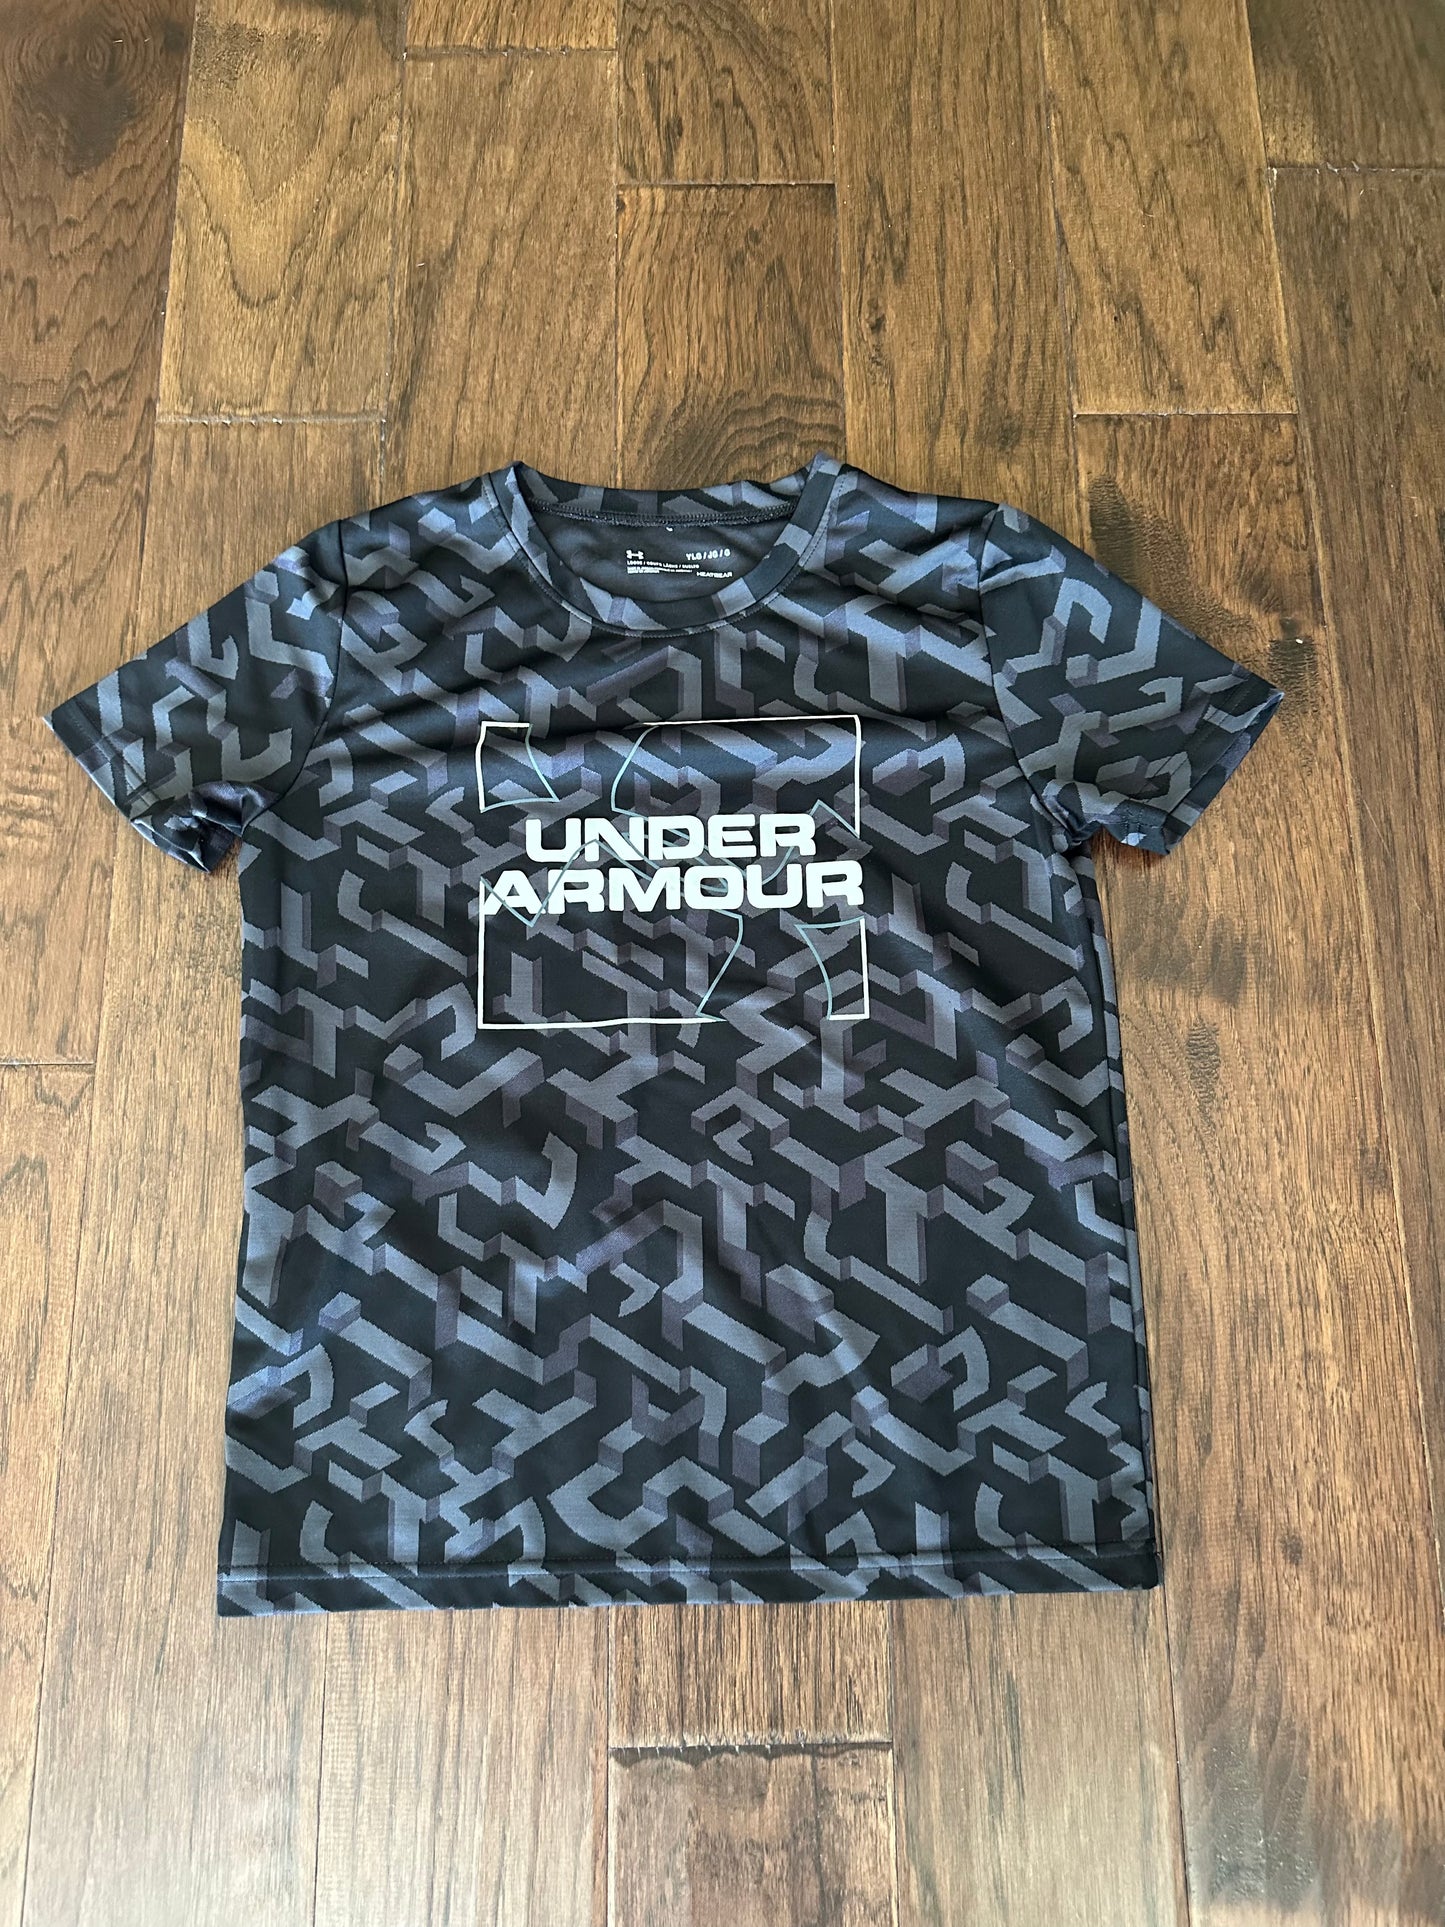 Under Armour - Black Shirt - Youth Large